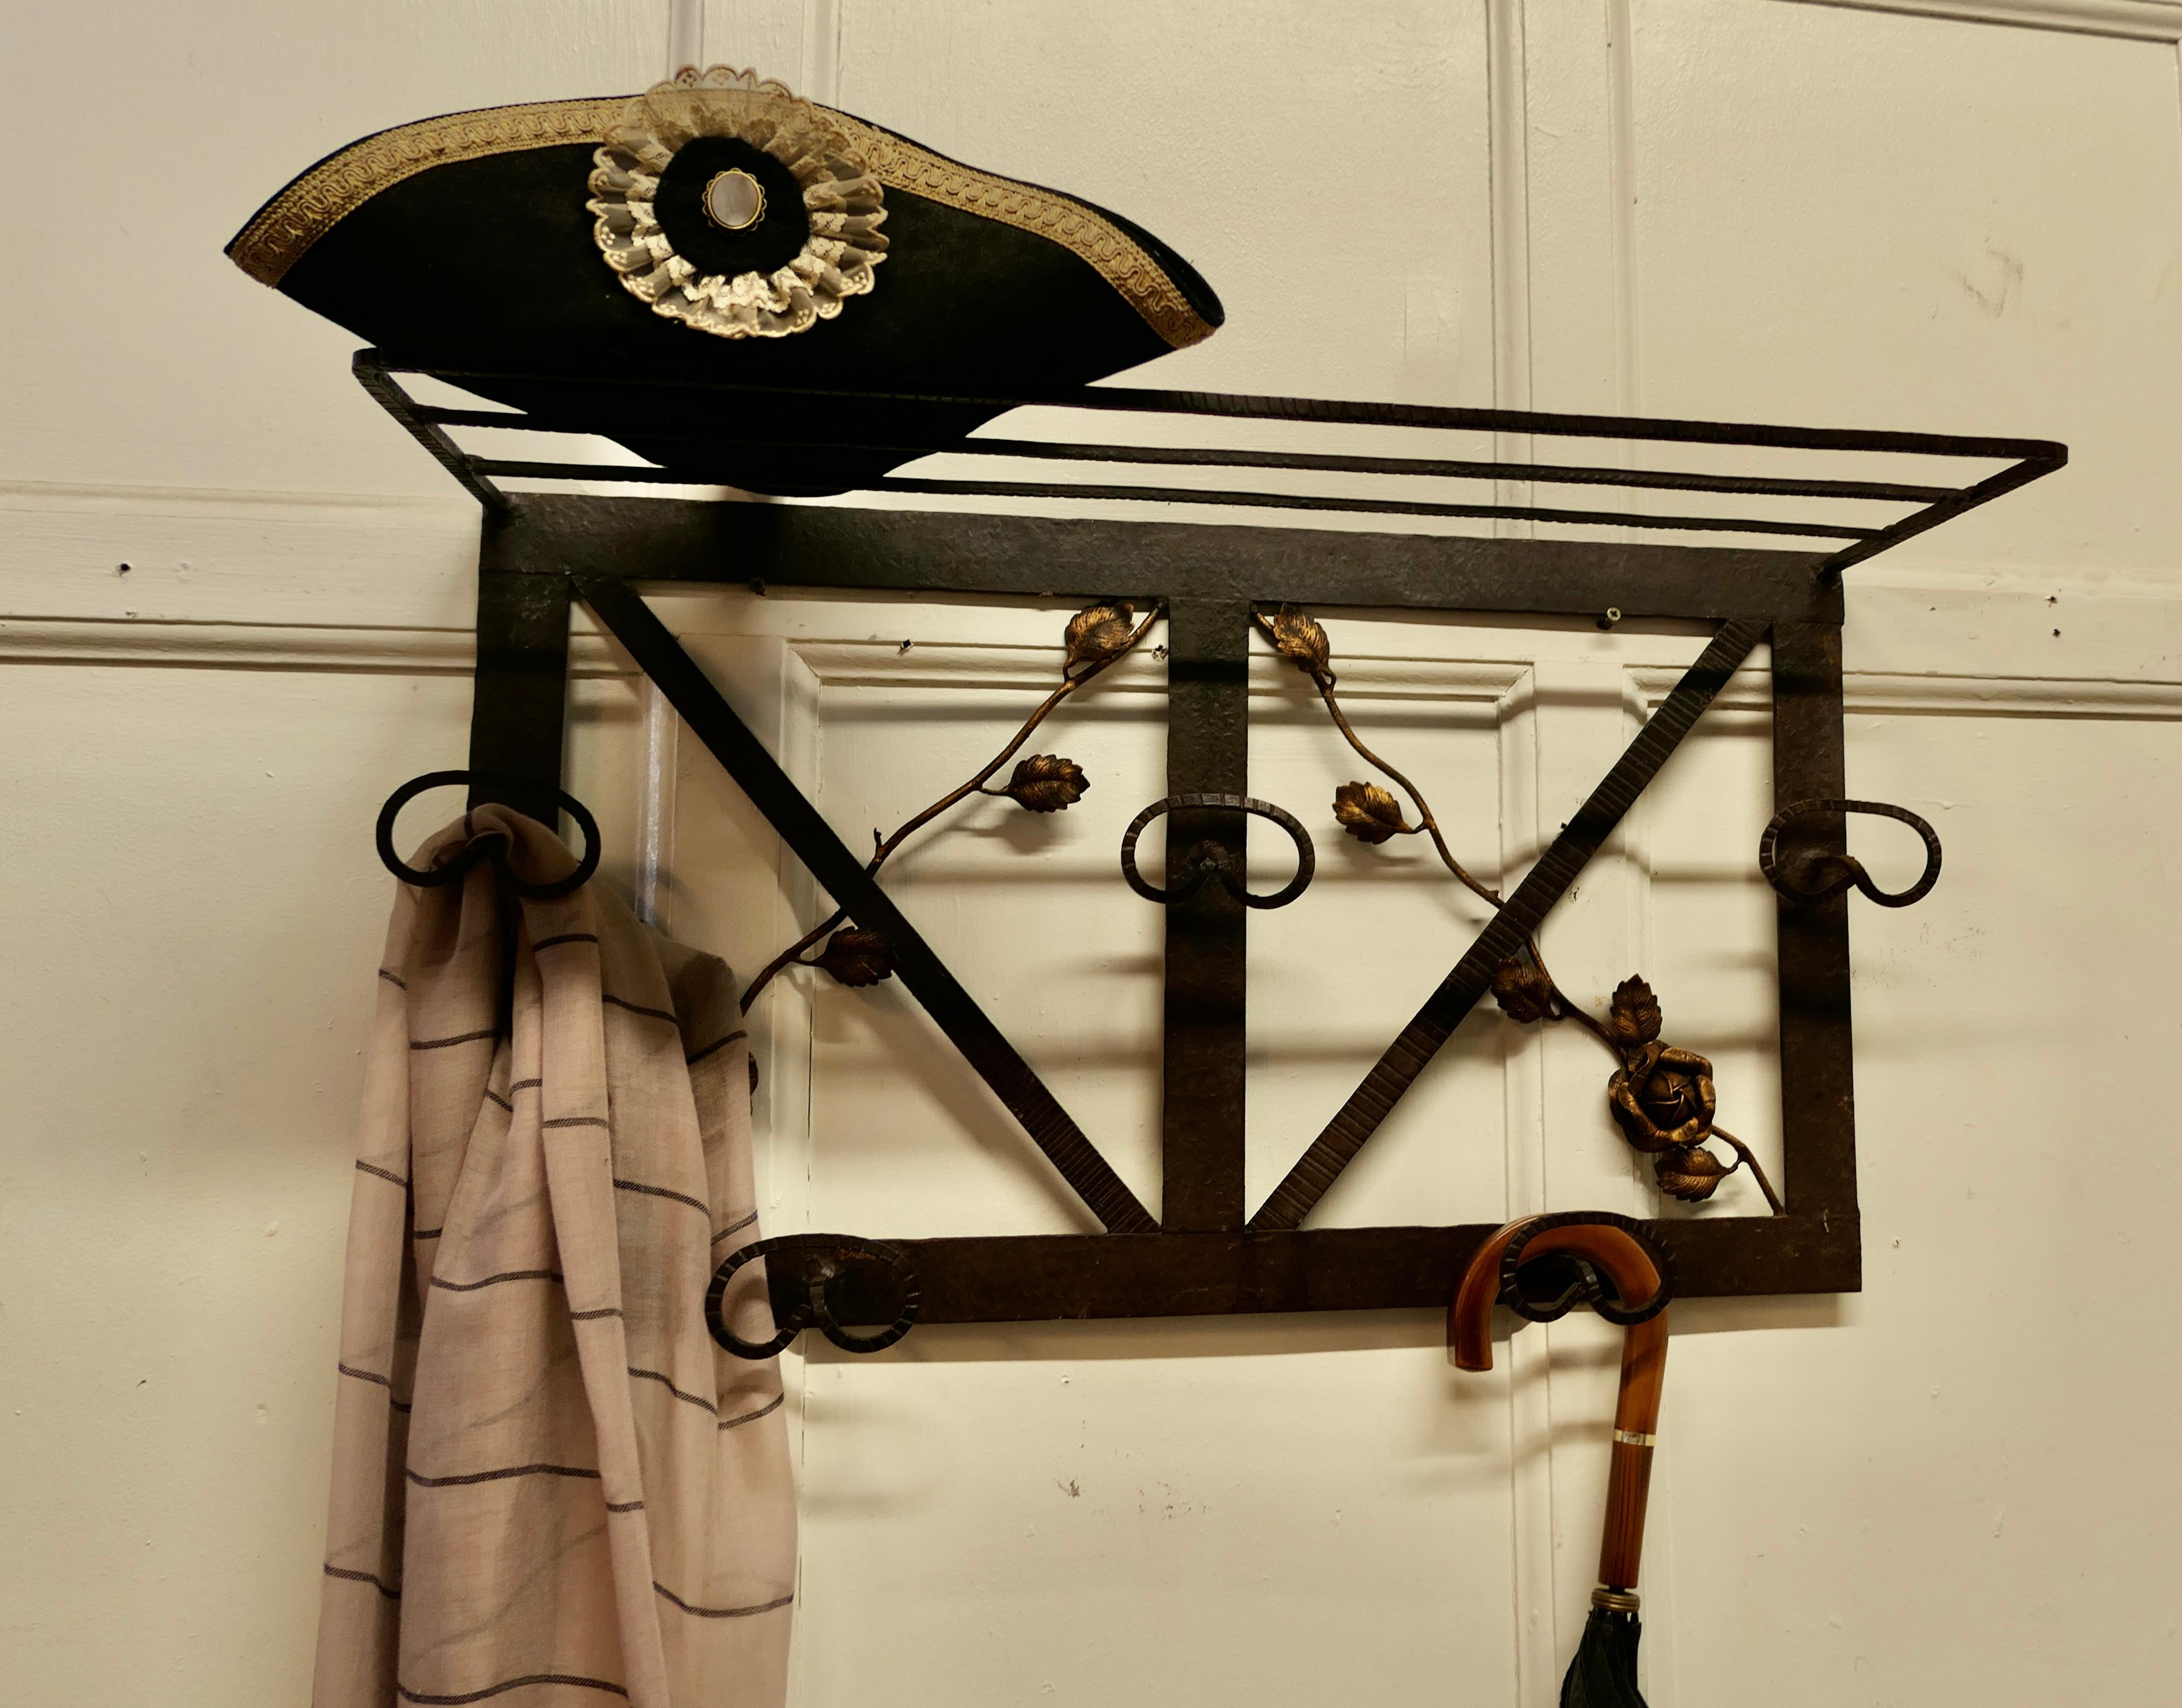 French Art Deco iron hat and coat rack with shelf decorated with roses.

This Art Deco period piece coat rack includes a shelf over the top and 3 large coat hangers ands 2 double hooks below. The Iron frame os decorated with roses picked out with